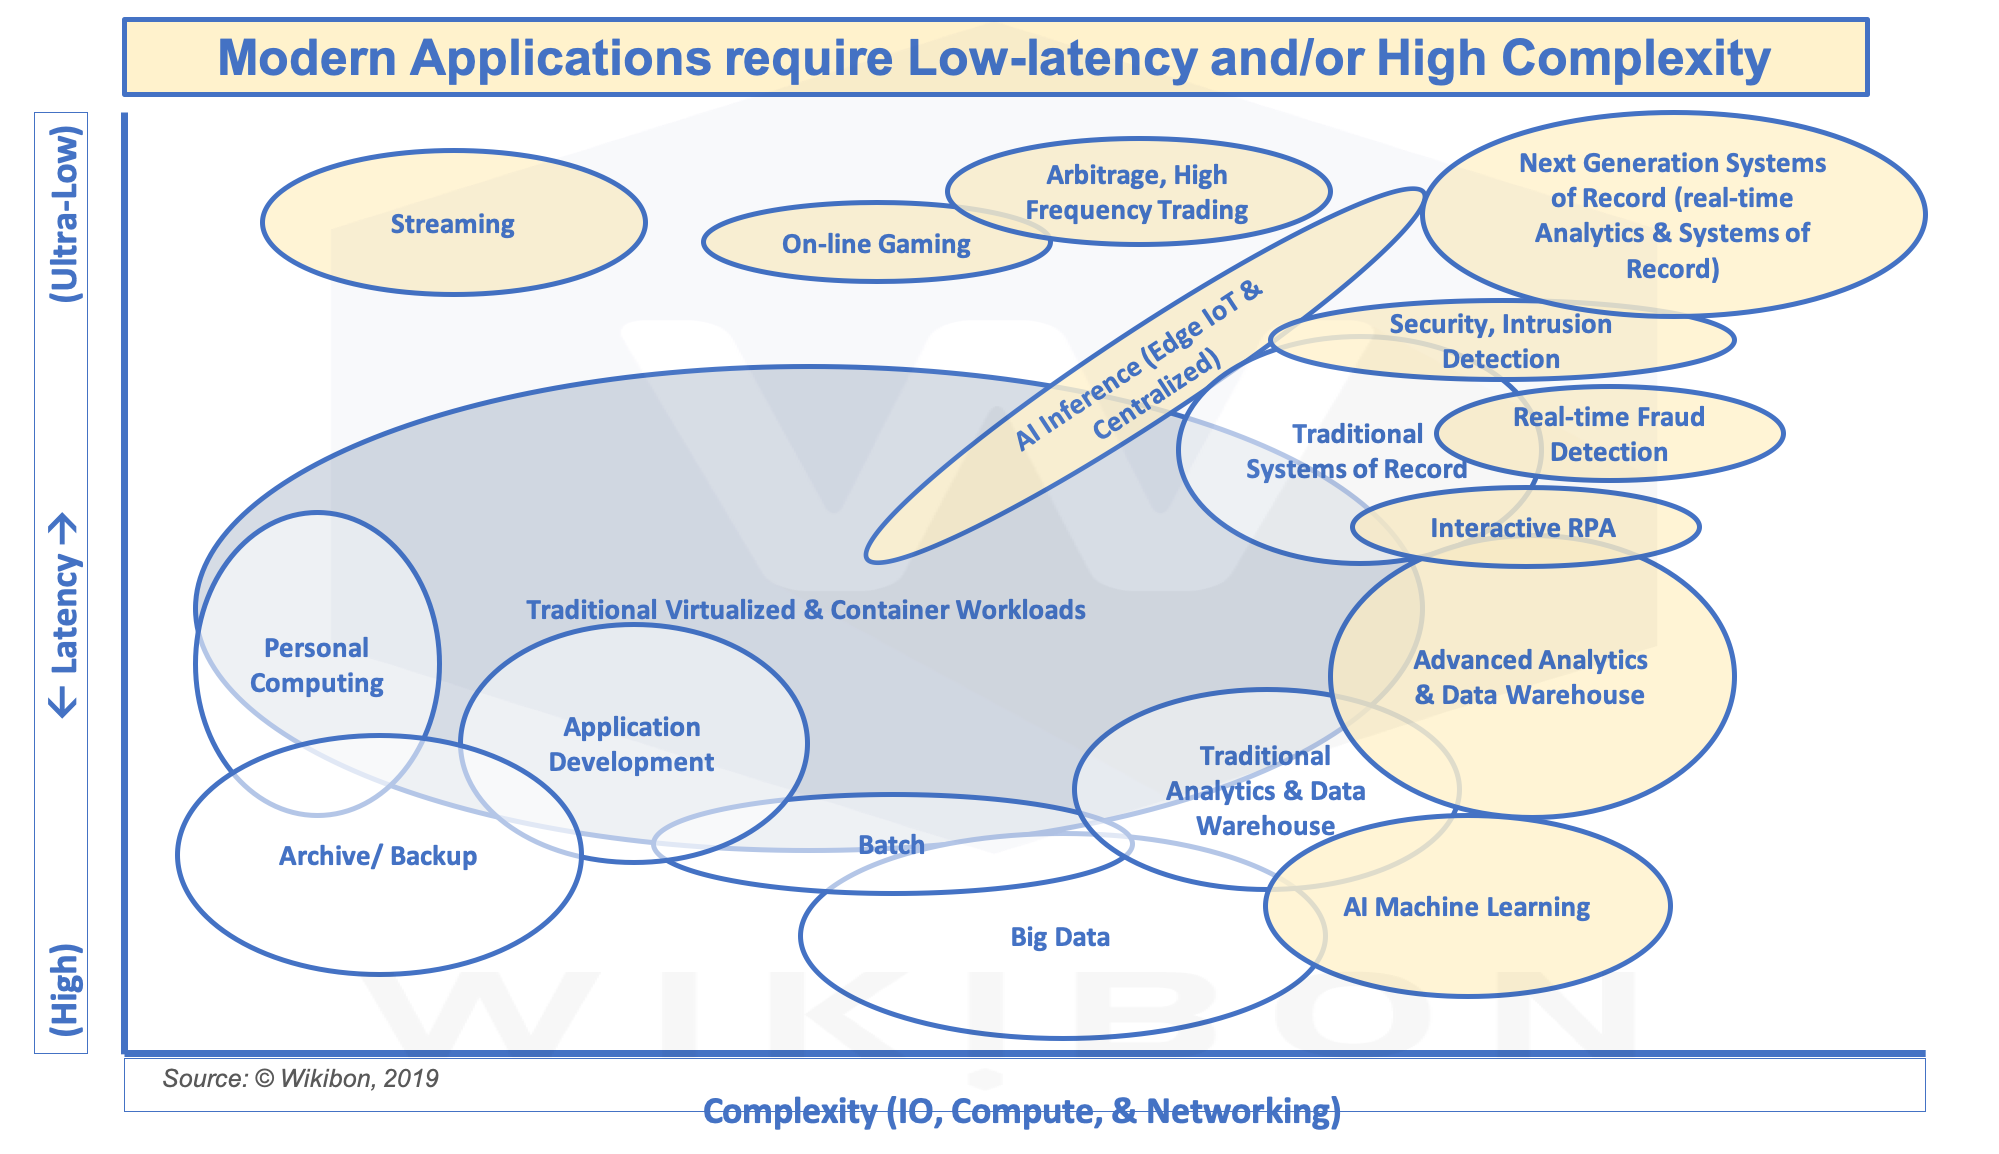 Emerging Ultra-low Latency & High Complexity Workloads